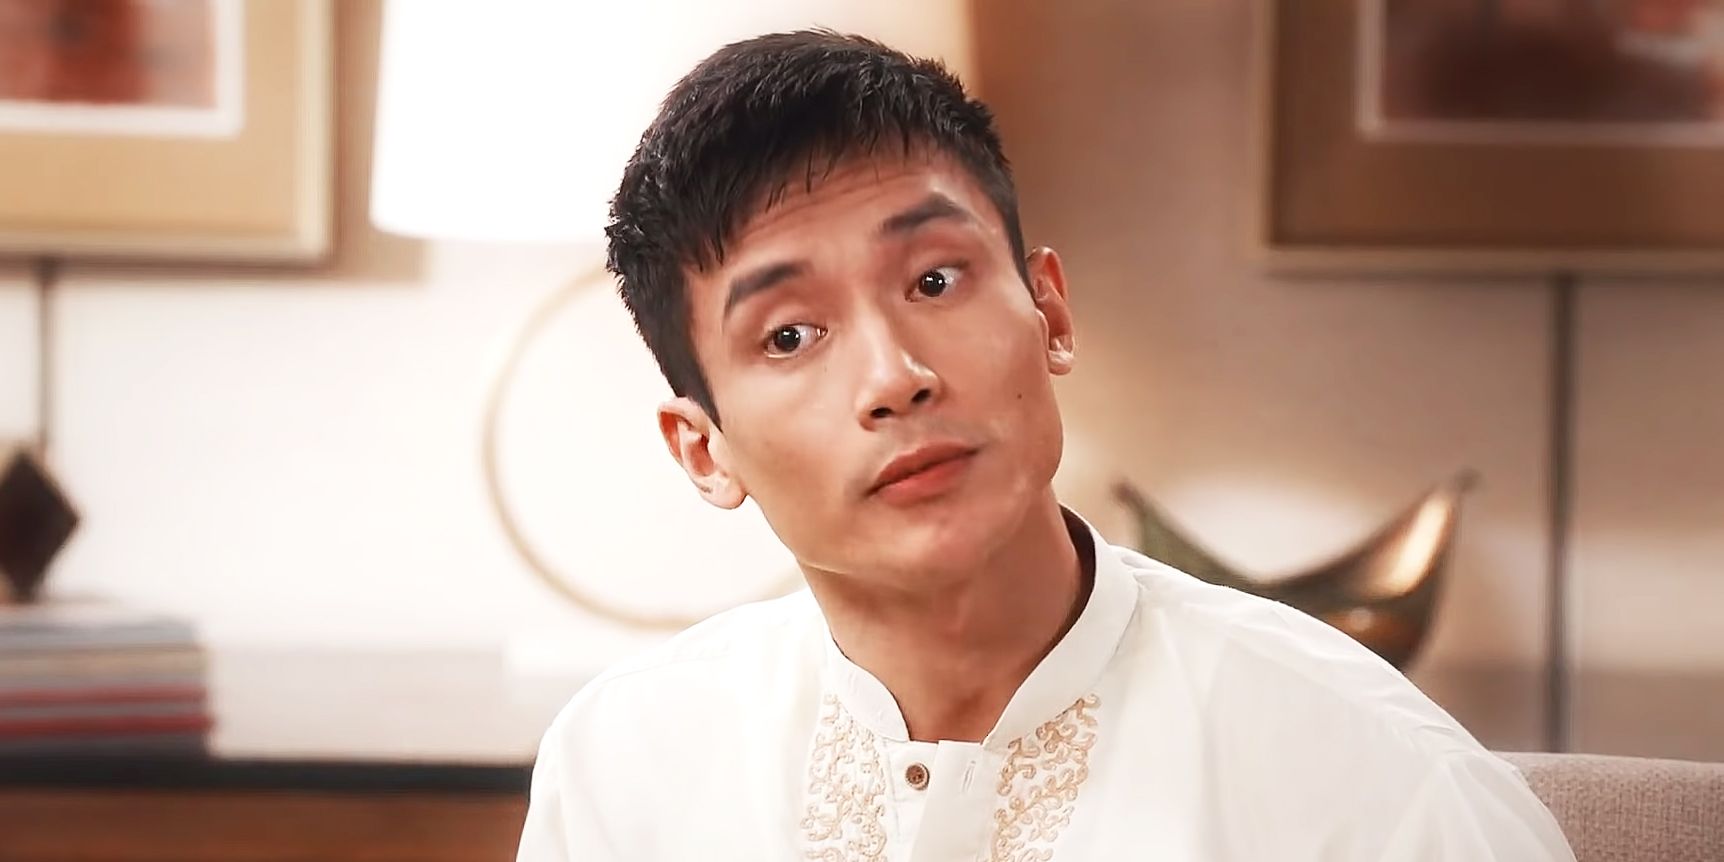 Jason Mendoza tilting his head in The Good Place.